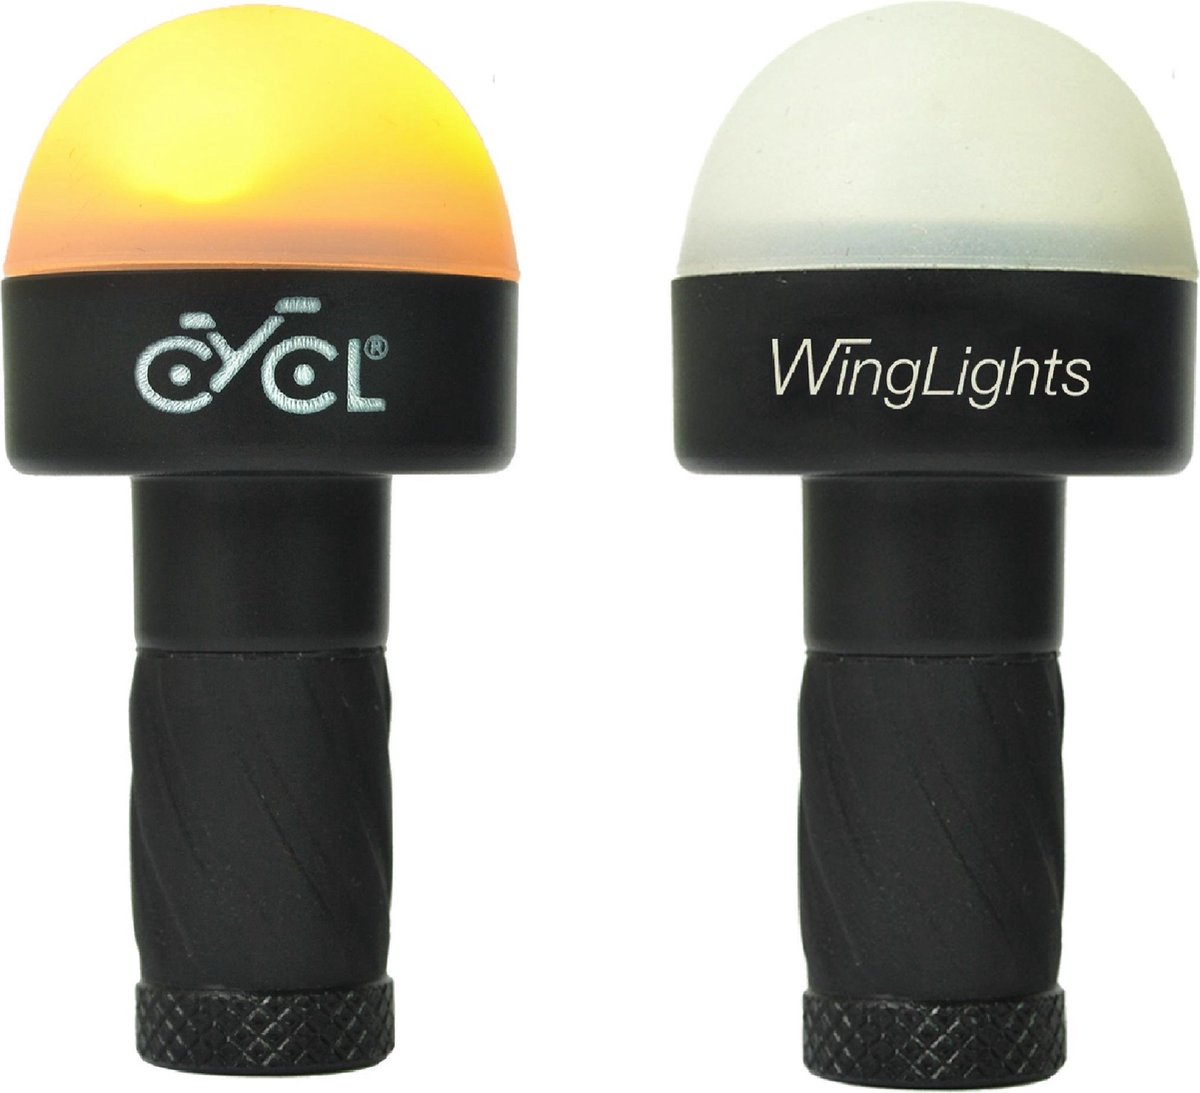 CYCL Wing Lights POP CYCL Wing Lights POP are extremely handy direction indicators with LED lights for the handlebars of your bike. The LED lights flash in a bright amber light and you are 360 degrees visible to all other road users in all weather conditions. Attach the Wing Lights easily by mounting them in the side of your handlebar. The Wing Light POP are 100% waterproof and come with 2 x CR2032 high quality batteries per unit. And to save battery life they automatically turn off after 45 seconds.